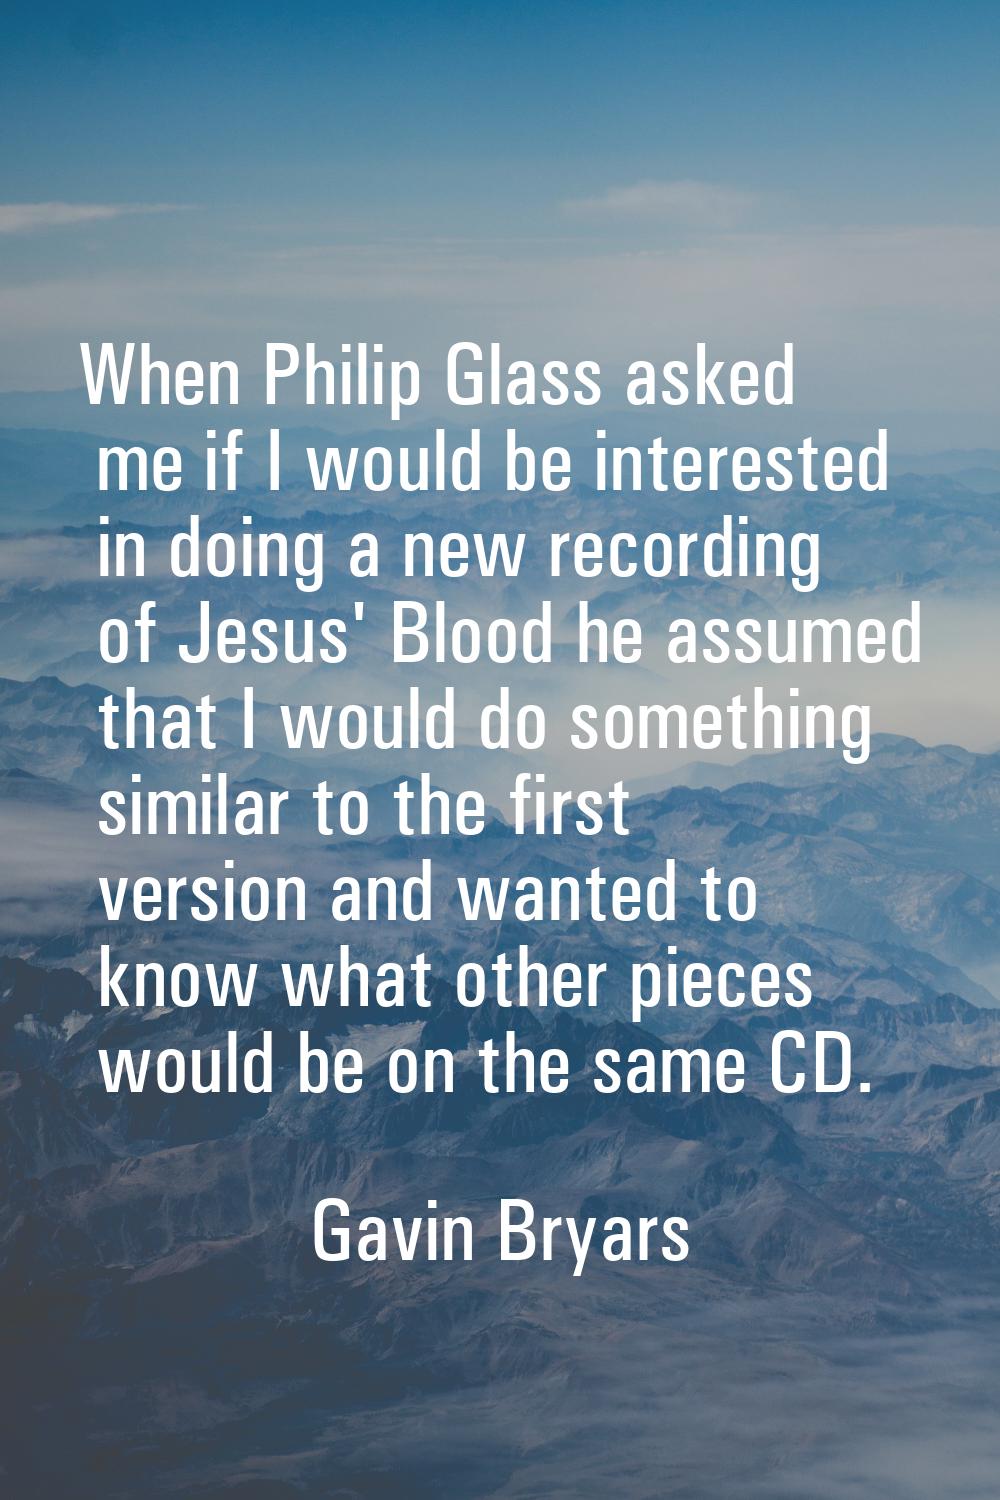 When Philip Glass asked me if I would be interested in doing a new recording of Jesus' Blood he ass